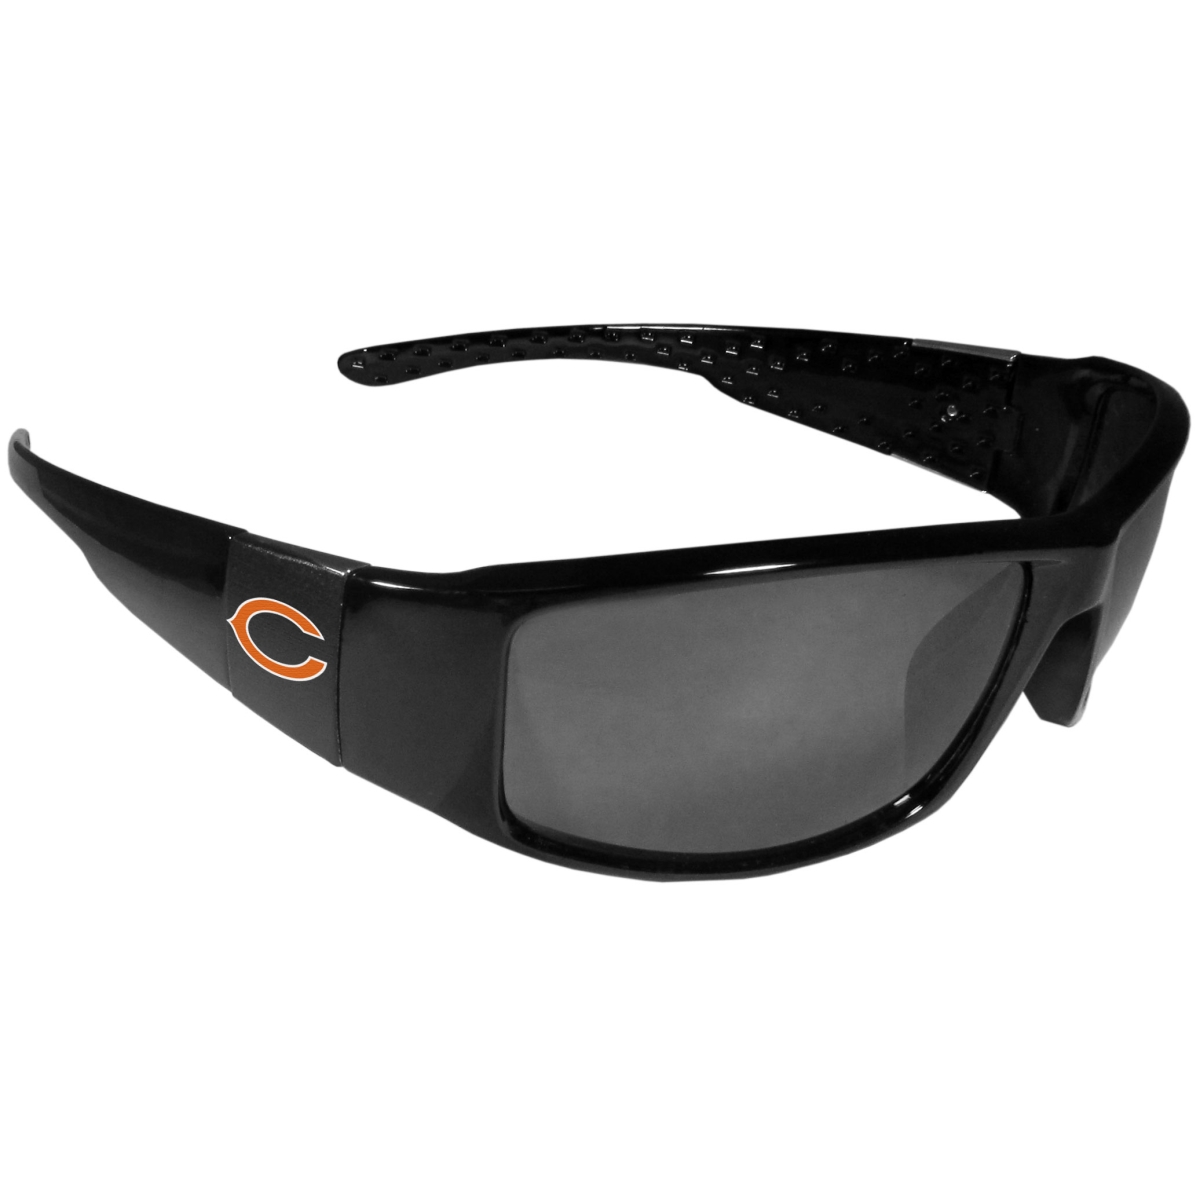 Picture of Siskiyou 2FCB005 Unisex NFL Chicago Bears Black Wrap Sunglasses - One Size